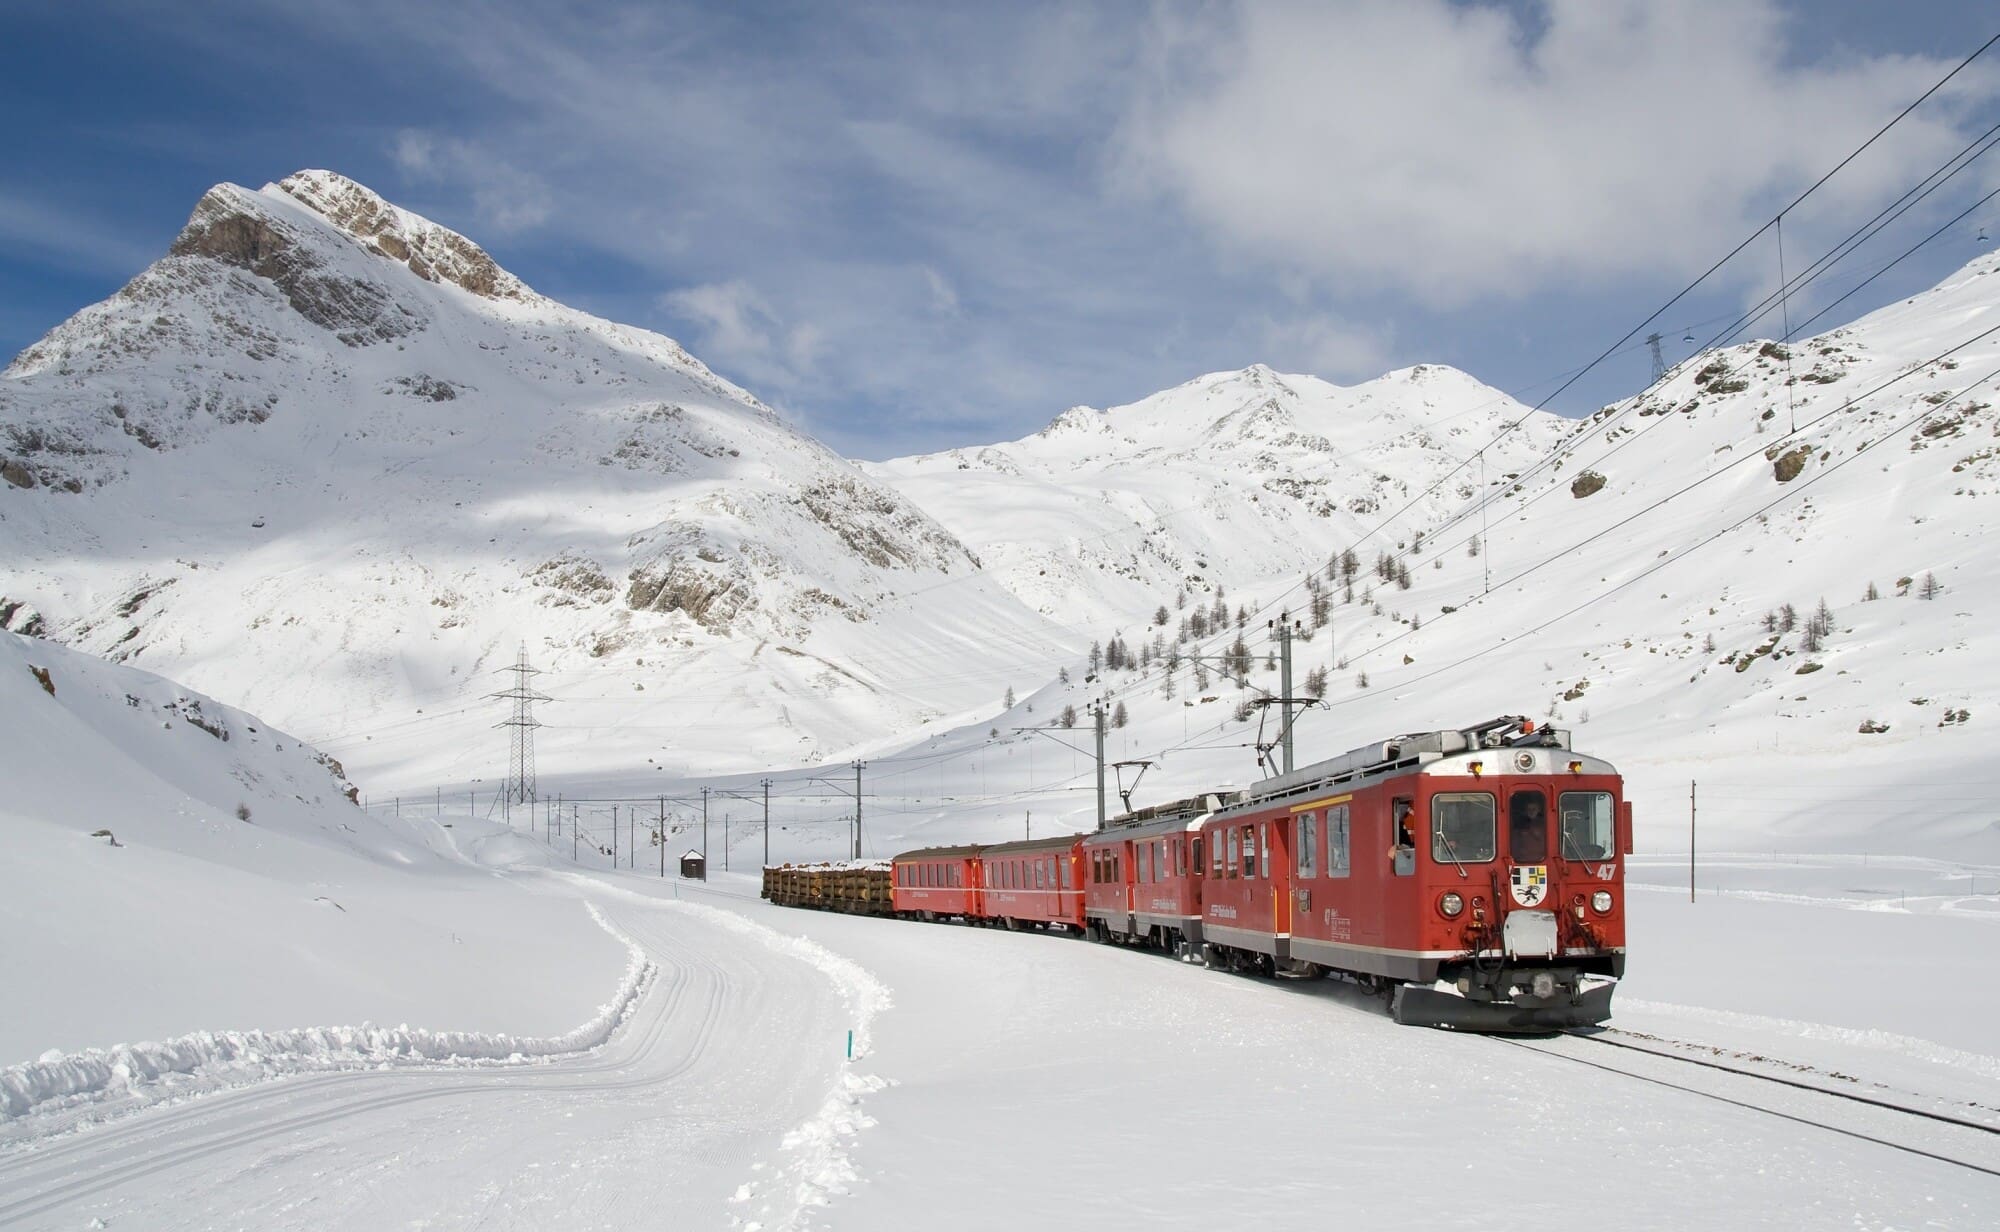 a train moving on railroad tracks through snowy winter mountains